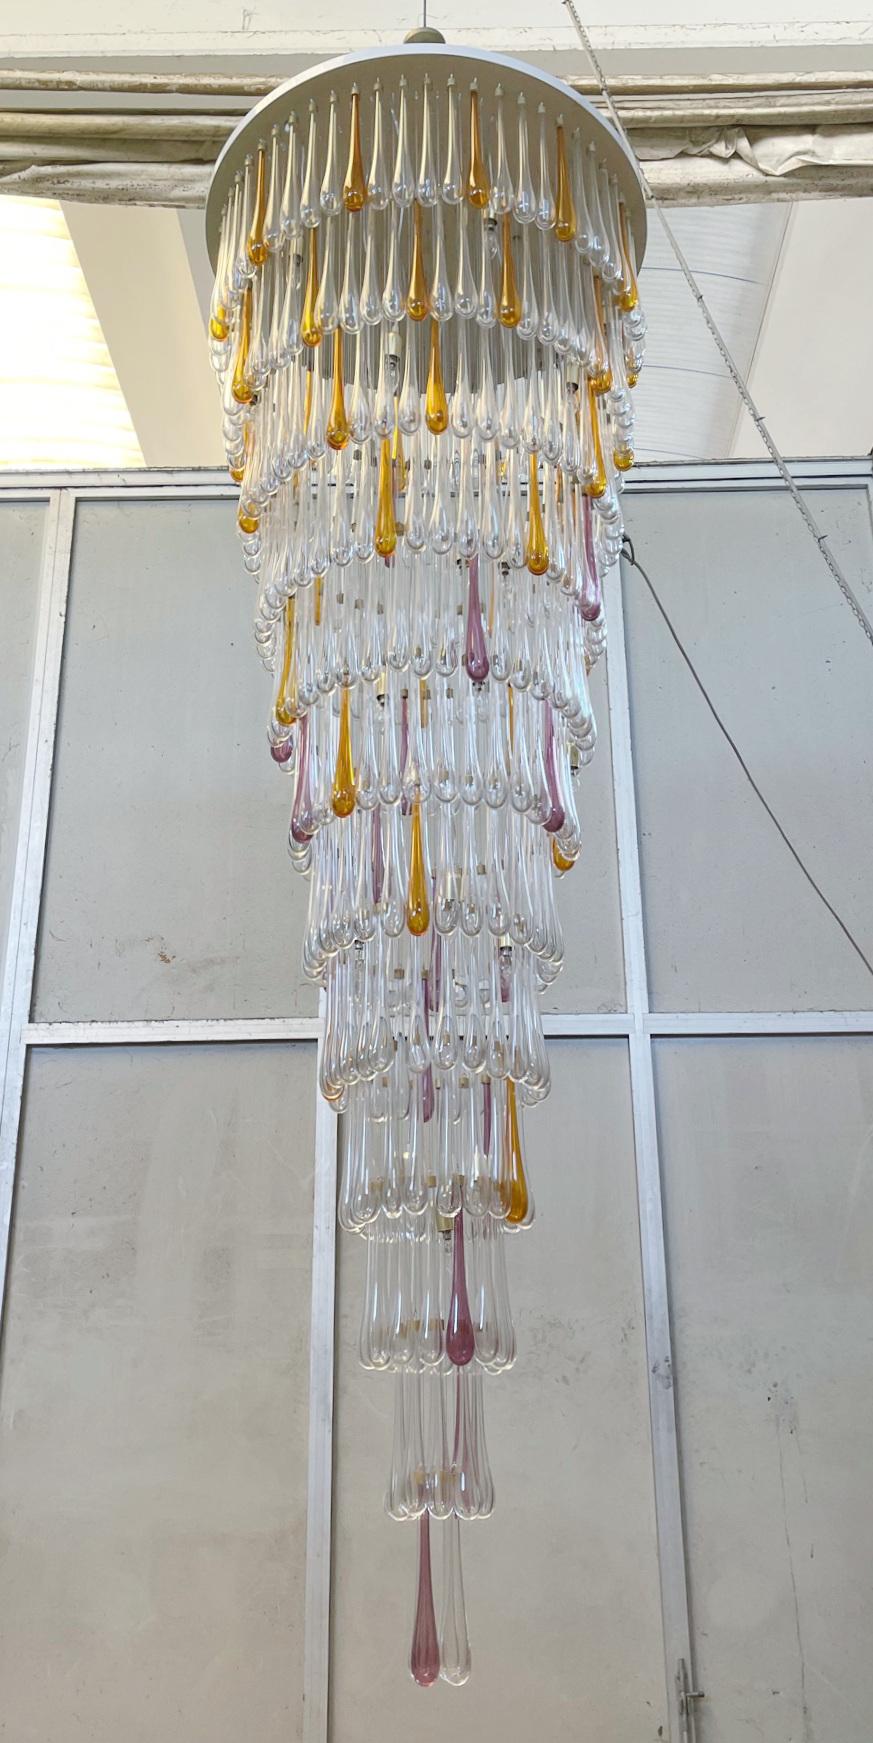 Oversized Italian chandelier shown in 12 tiers of hand blown Murano hollow glass drops in clear mixed with orange and amethyst colors, hanging from glossy white ceiling plate / Made in Italy
24 lights / E12 or E14 type / max 40W each
Measures: